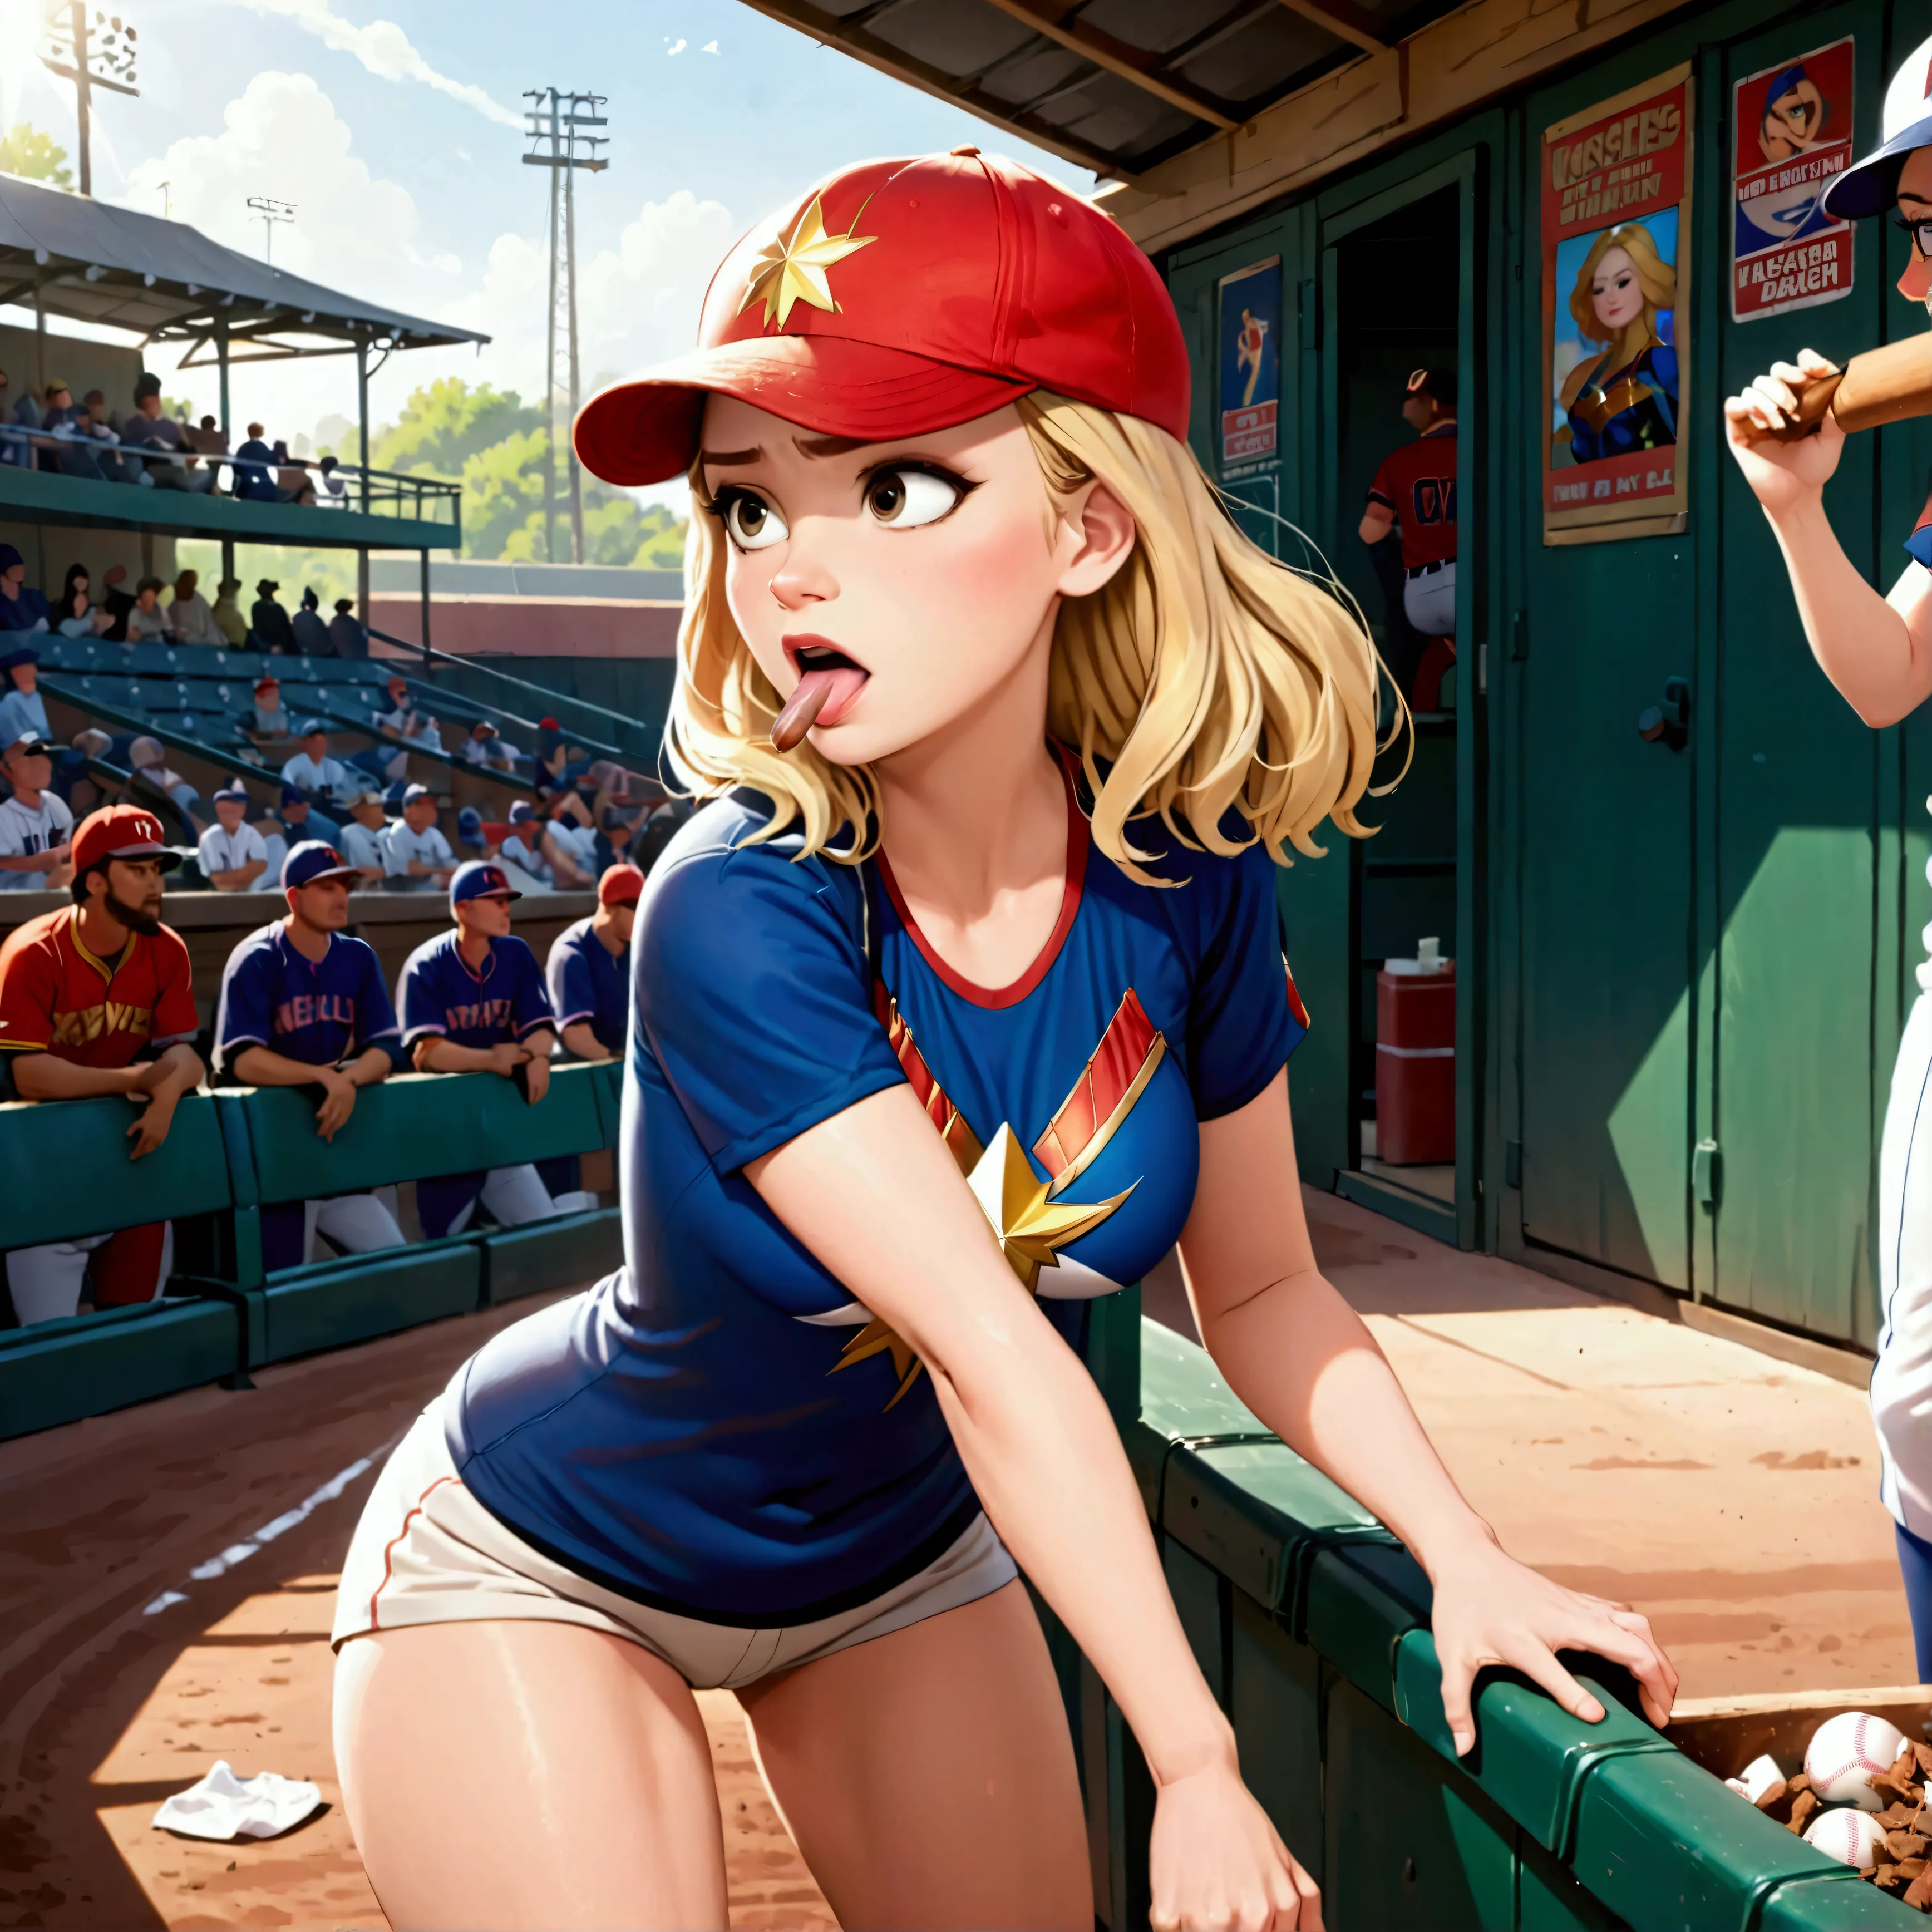 (Brea Larson, age 25, Captain Marvel, baseball cap, chewing tobacco) she is pitching the baseball, crowded dugout, baseball game...